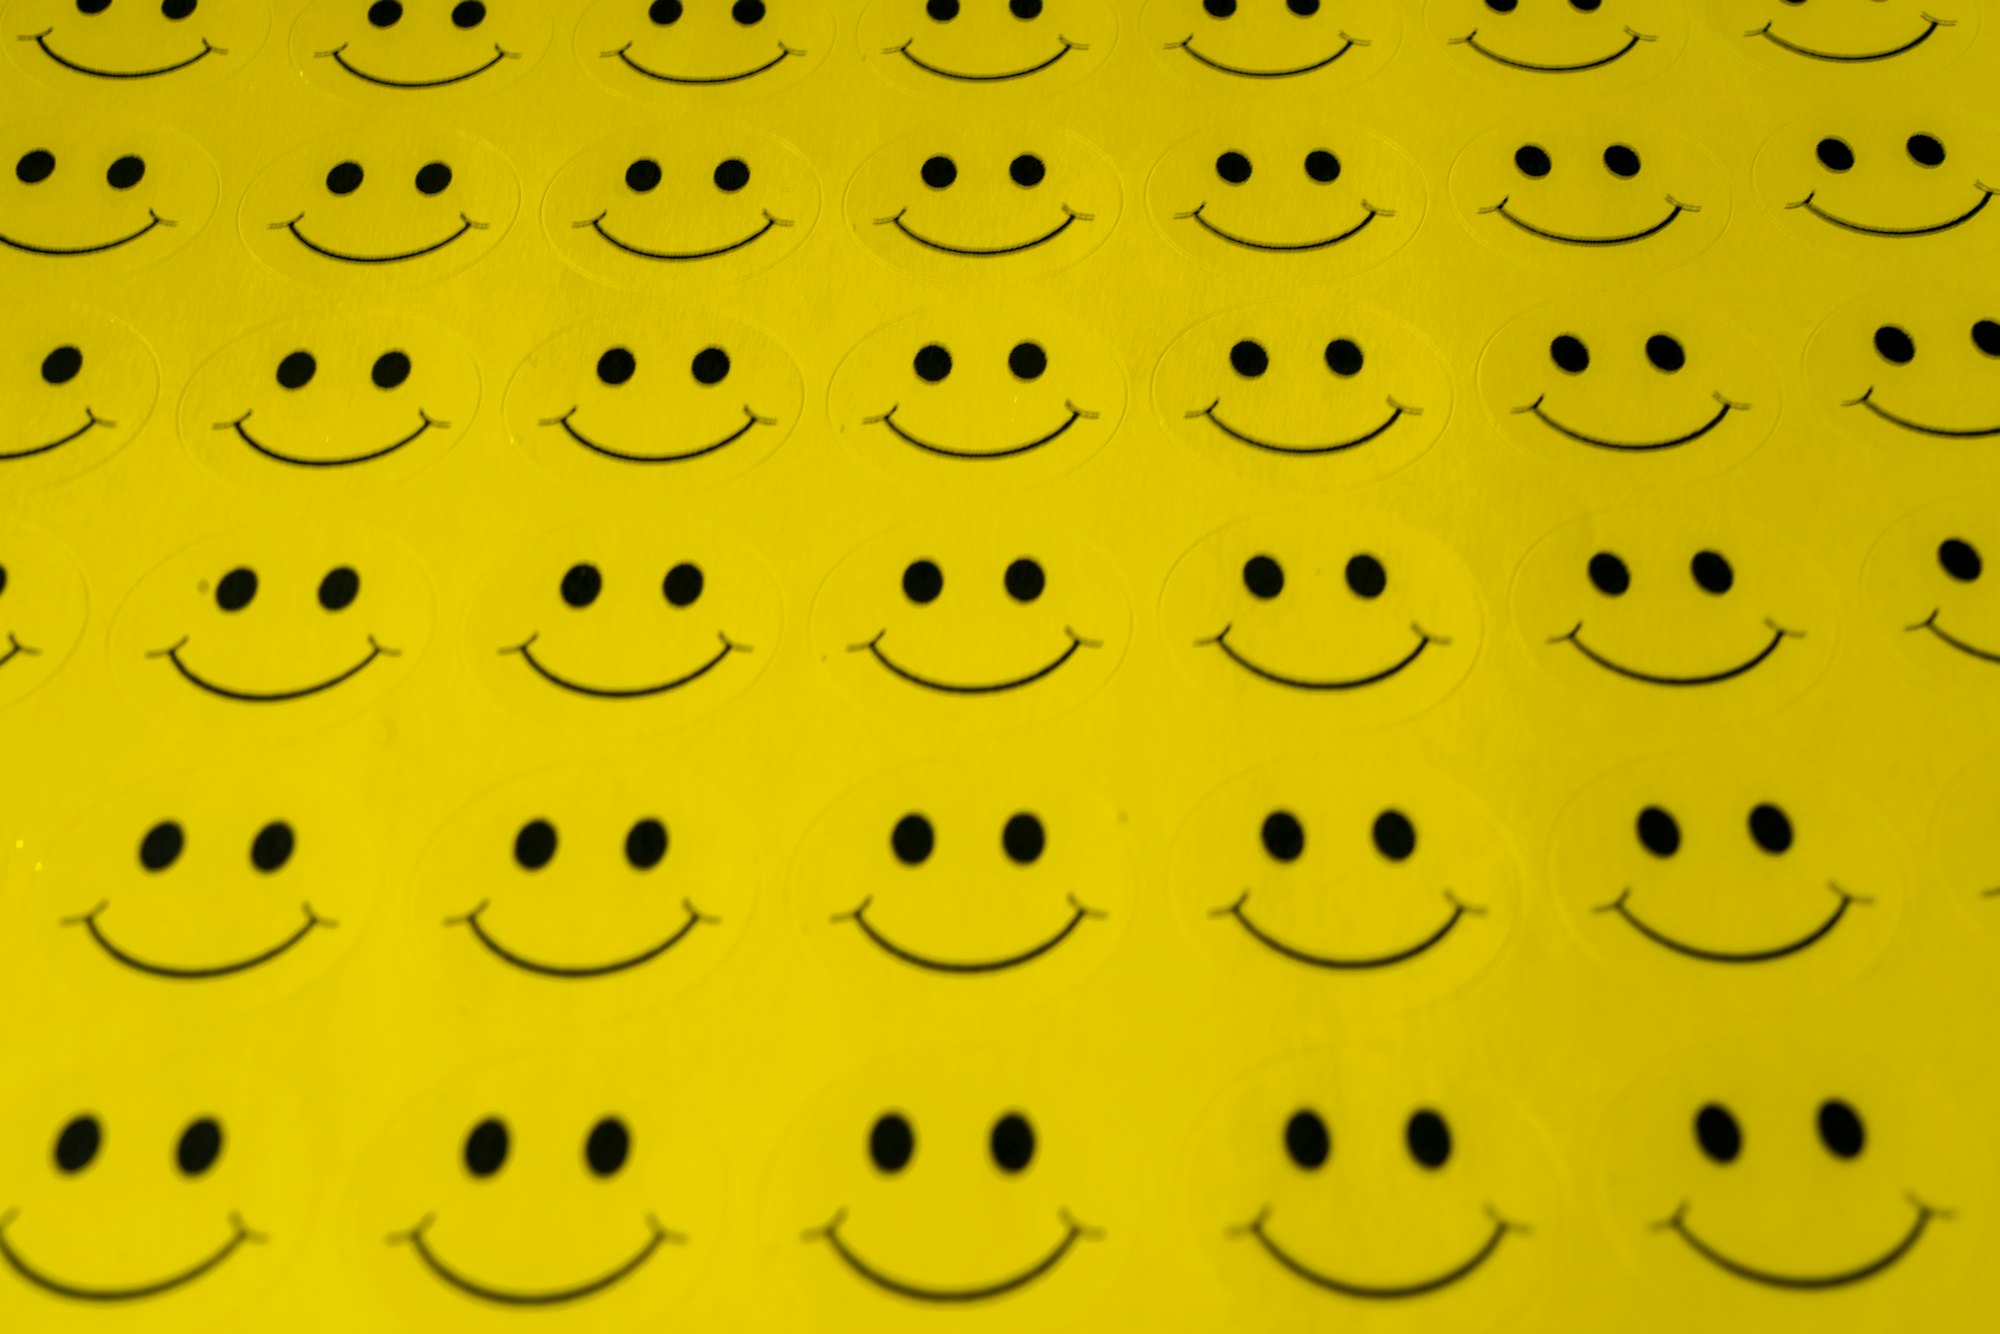 A set of yellow smiley stickers